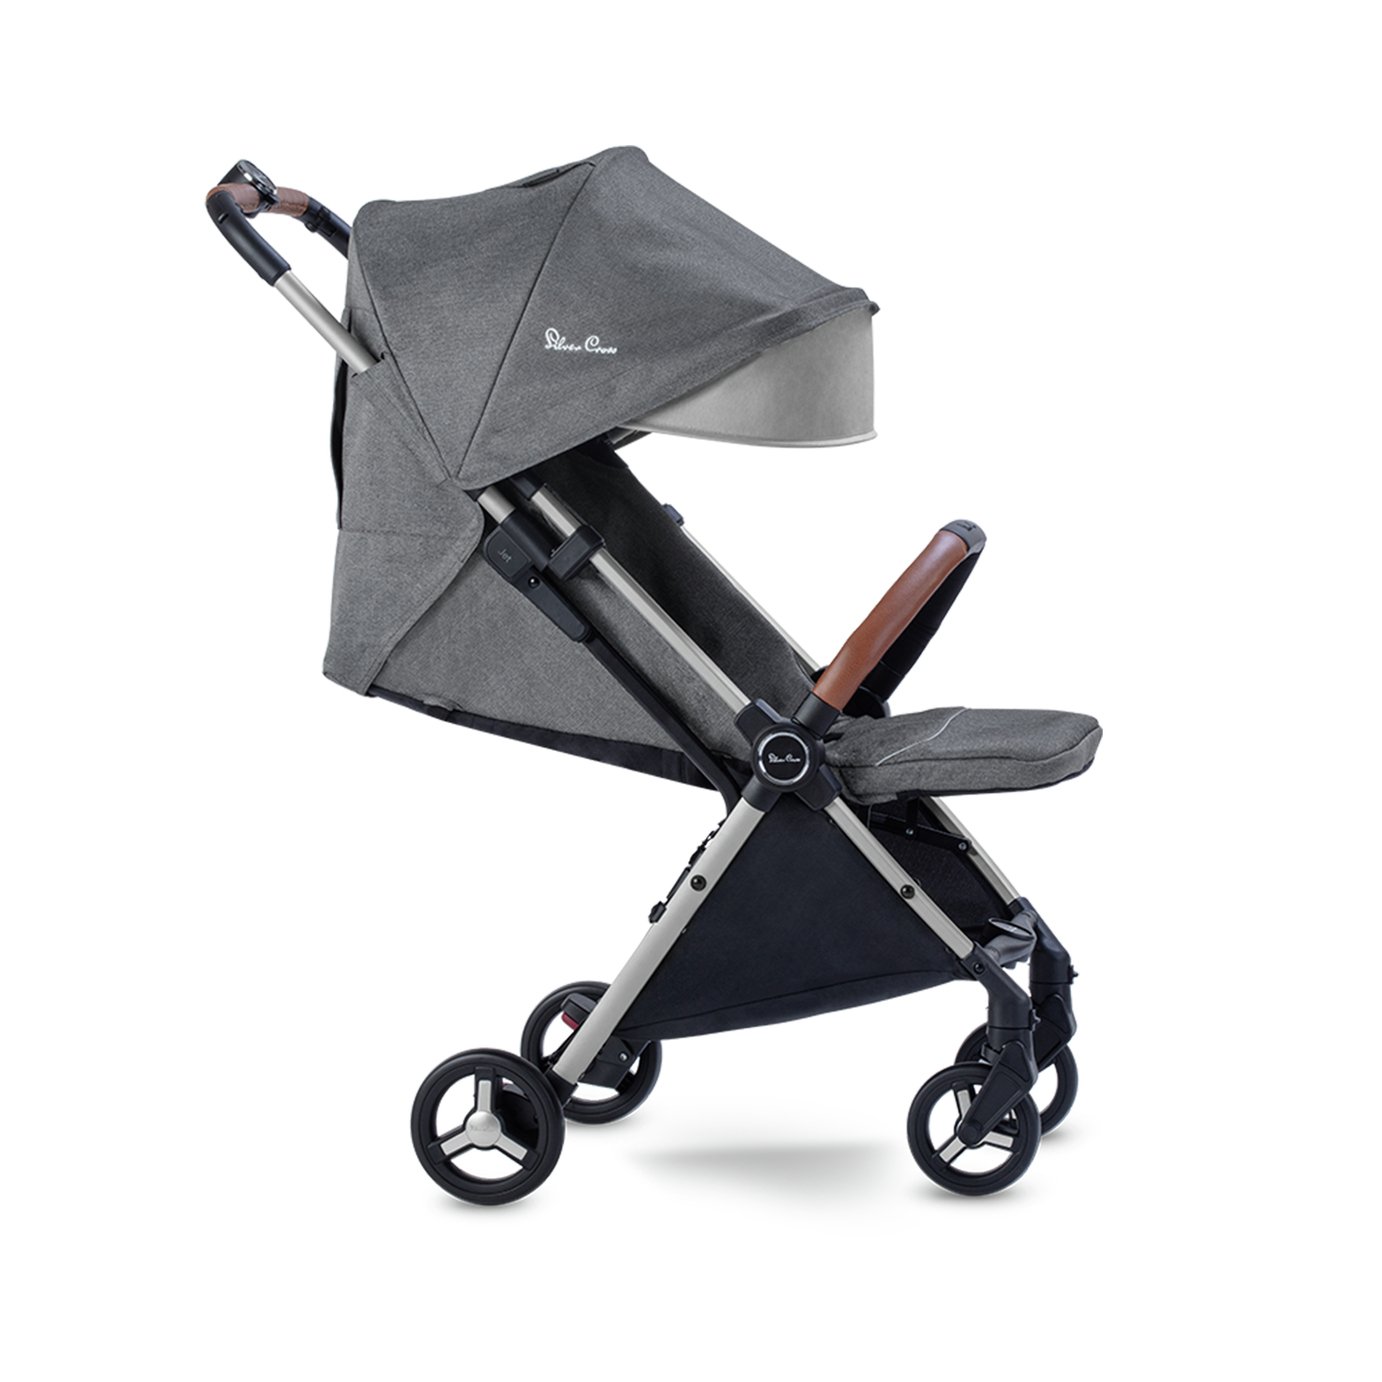 Silver Cross Jet Special Edition Stroller Review